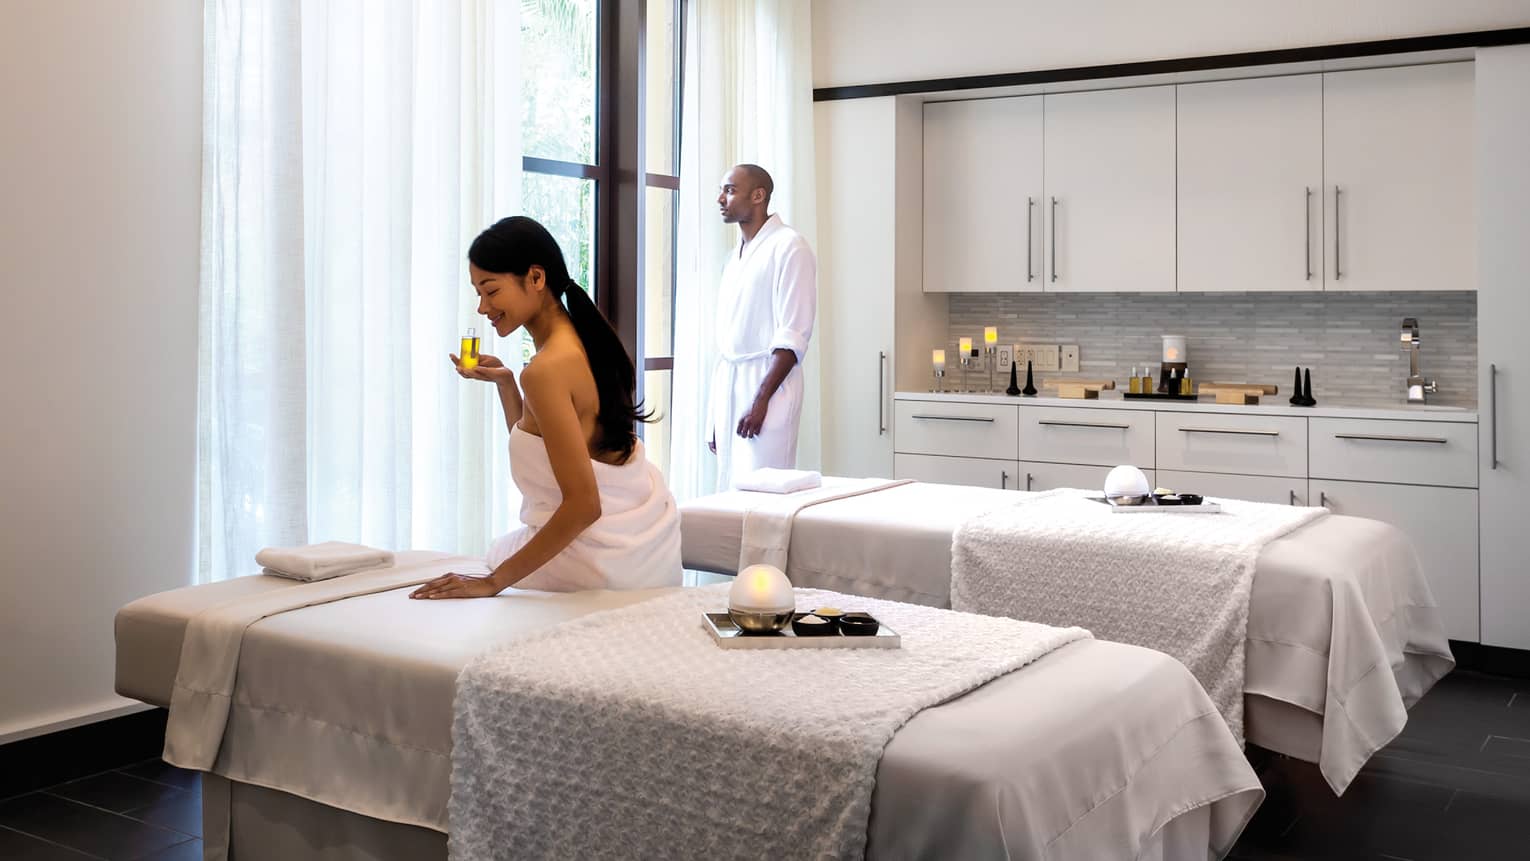 Woman wearing towel sits on edge of Couples Suite massage table, smells oil as man stands at window